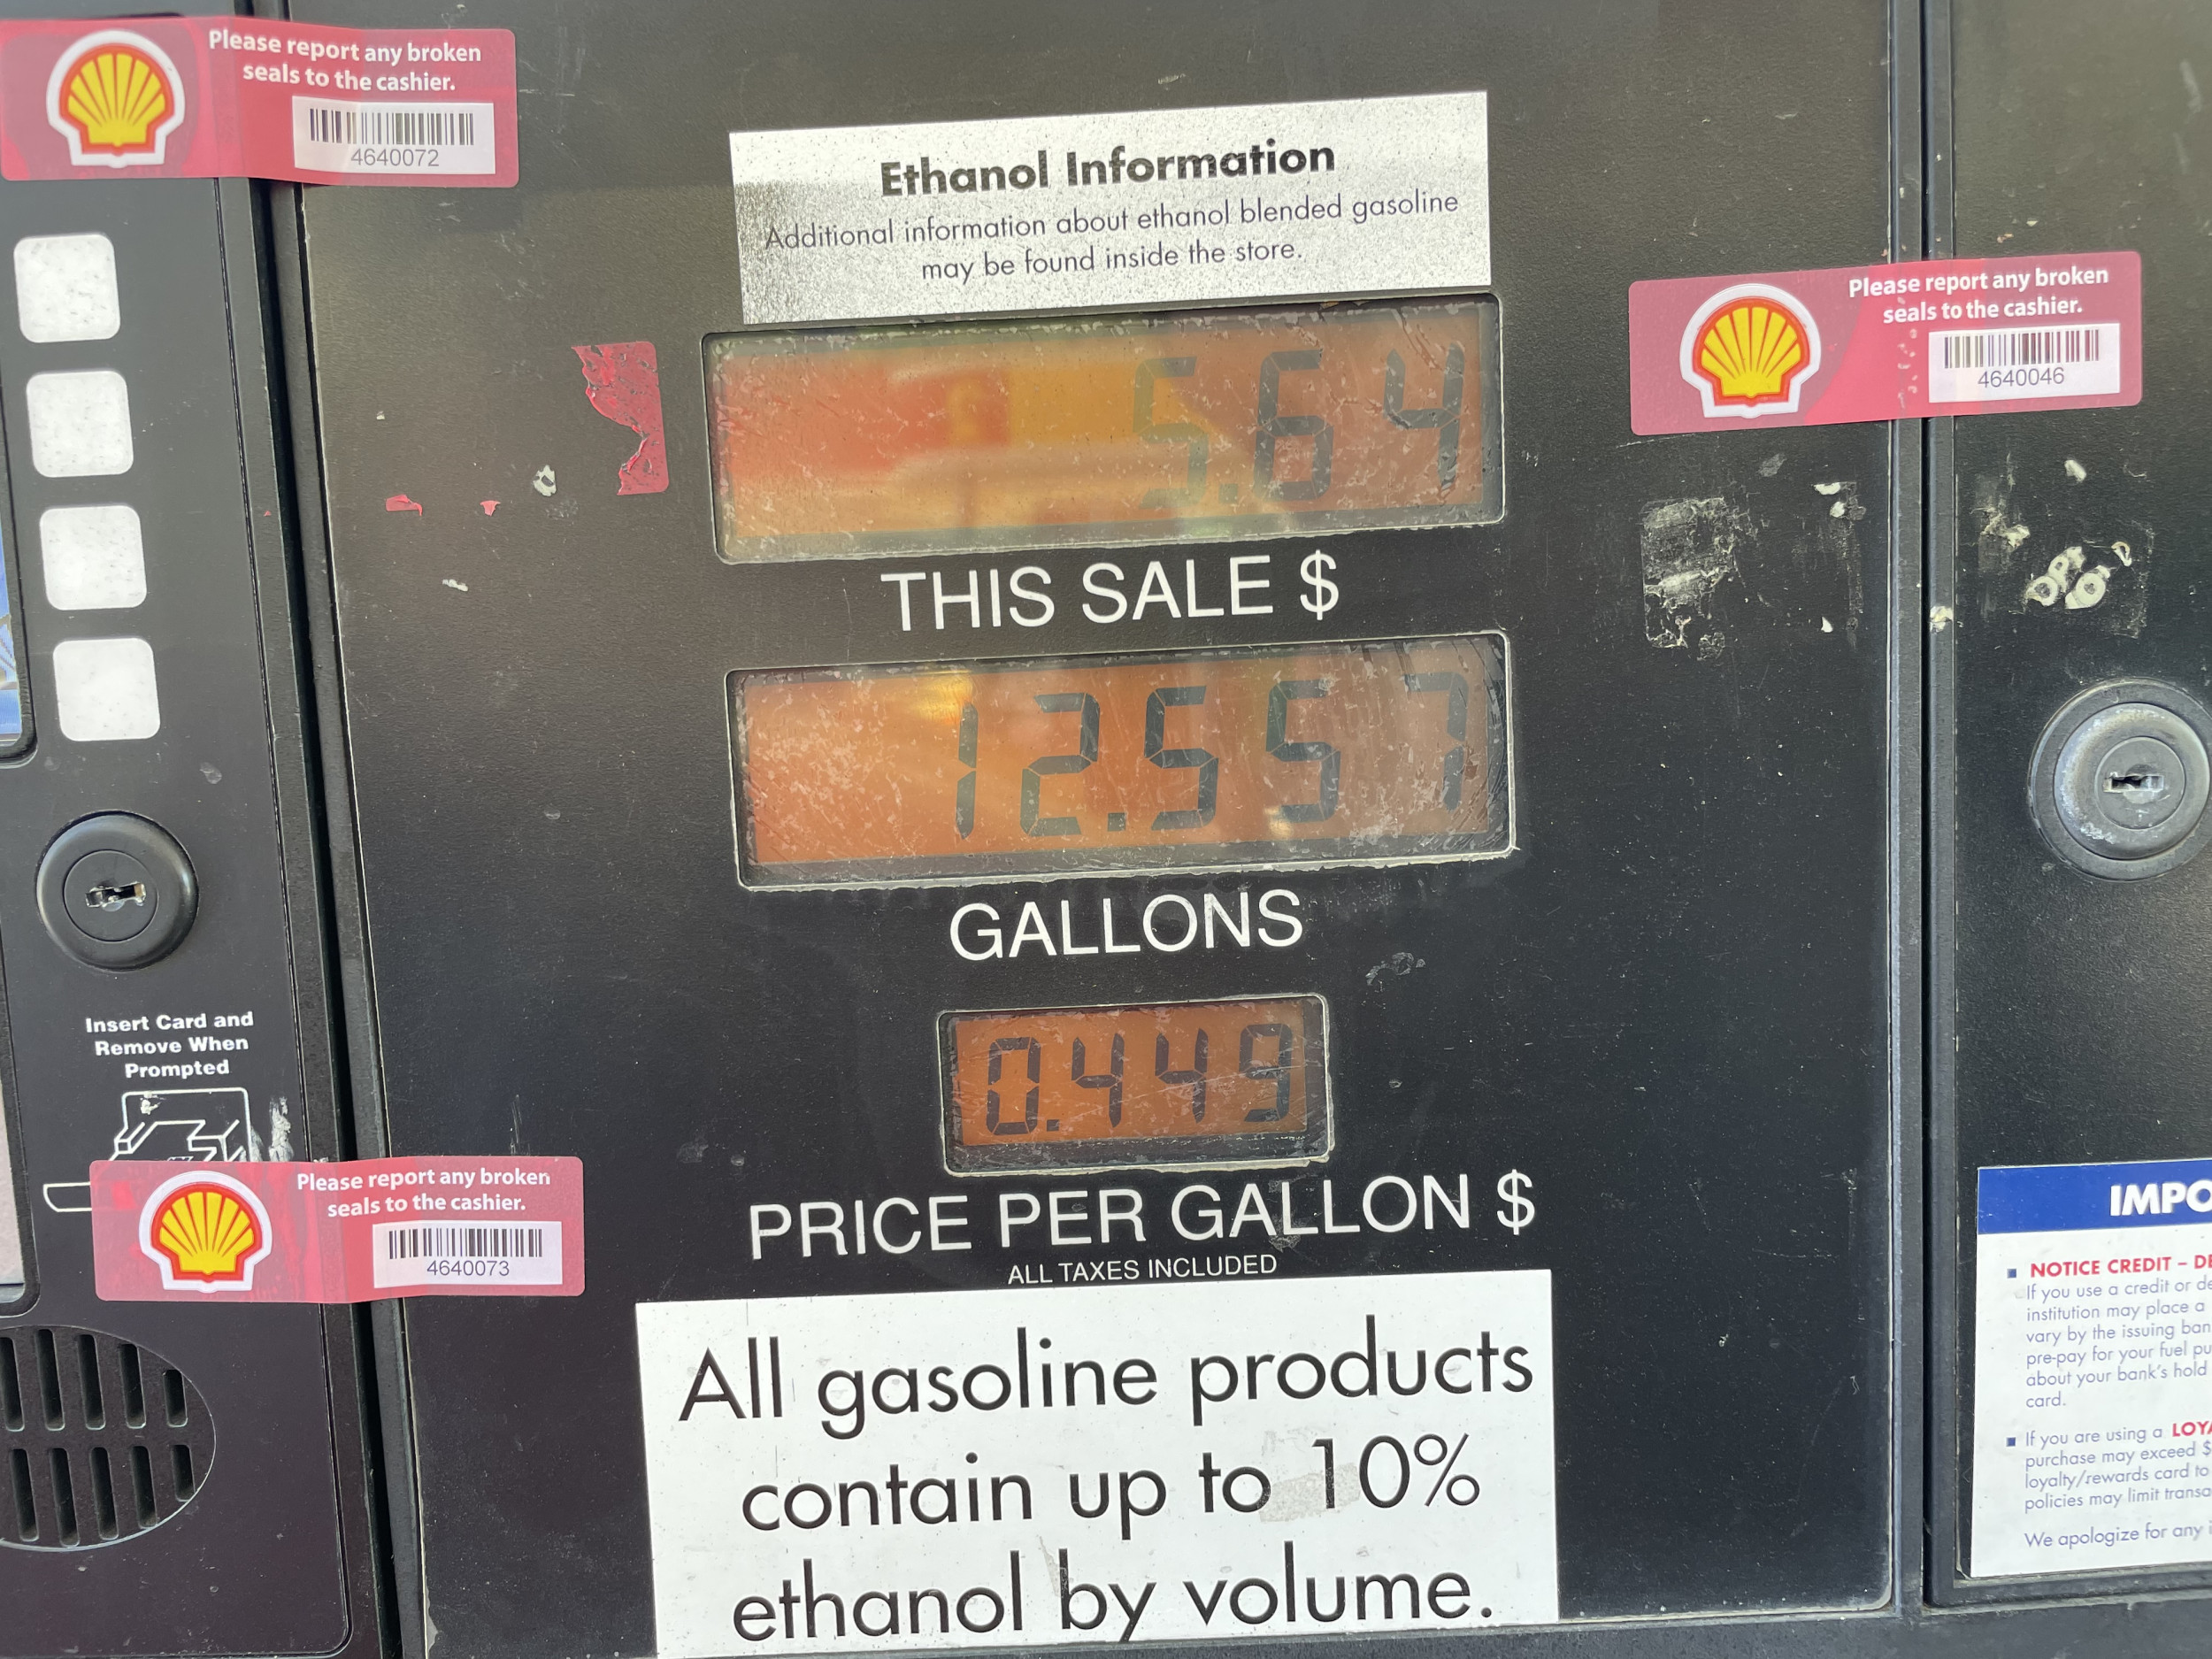 Gas Station Owner Near ‘Tears’ Unknowingly Charged Just 45 Cents Per Gallon